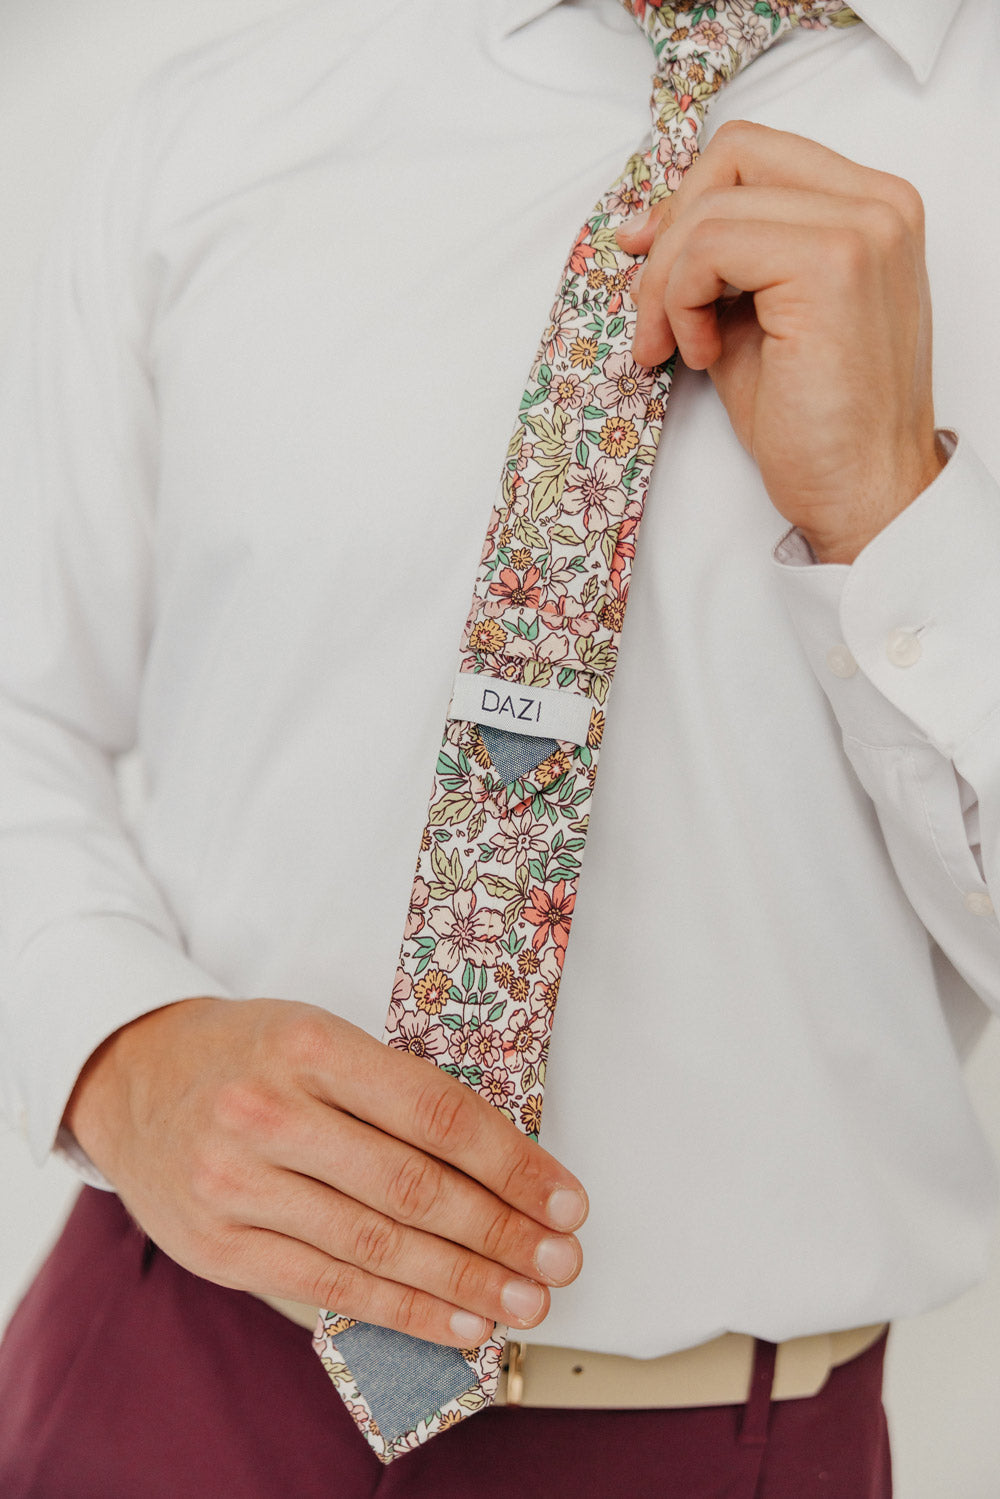 Carnation 2.5" Wide Skinny Tie worn with a white shirt, tan belt and maroon suit pants.